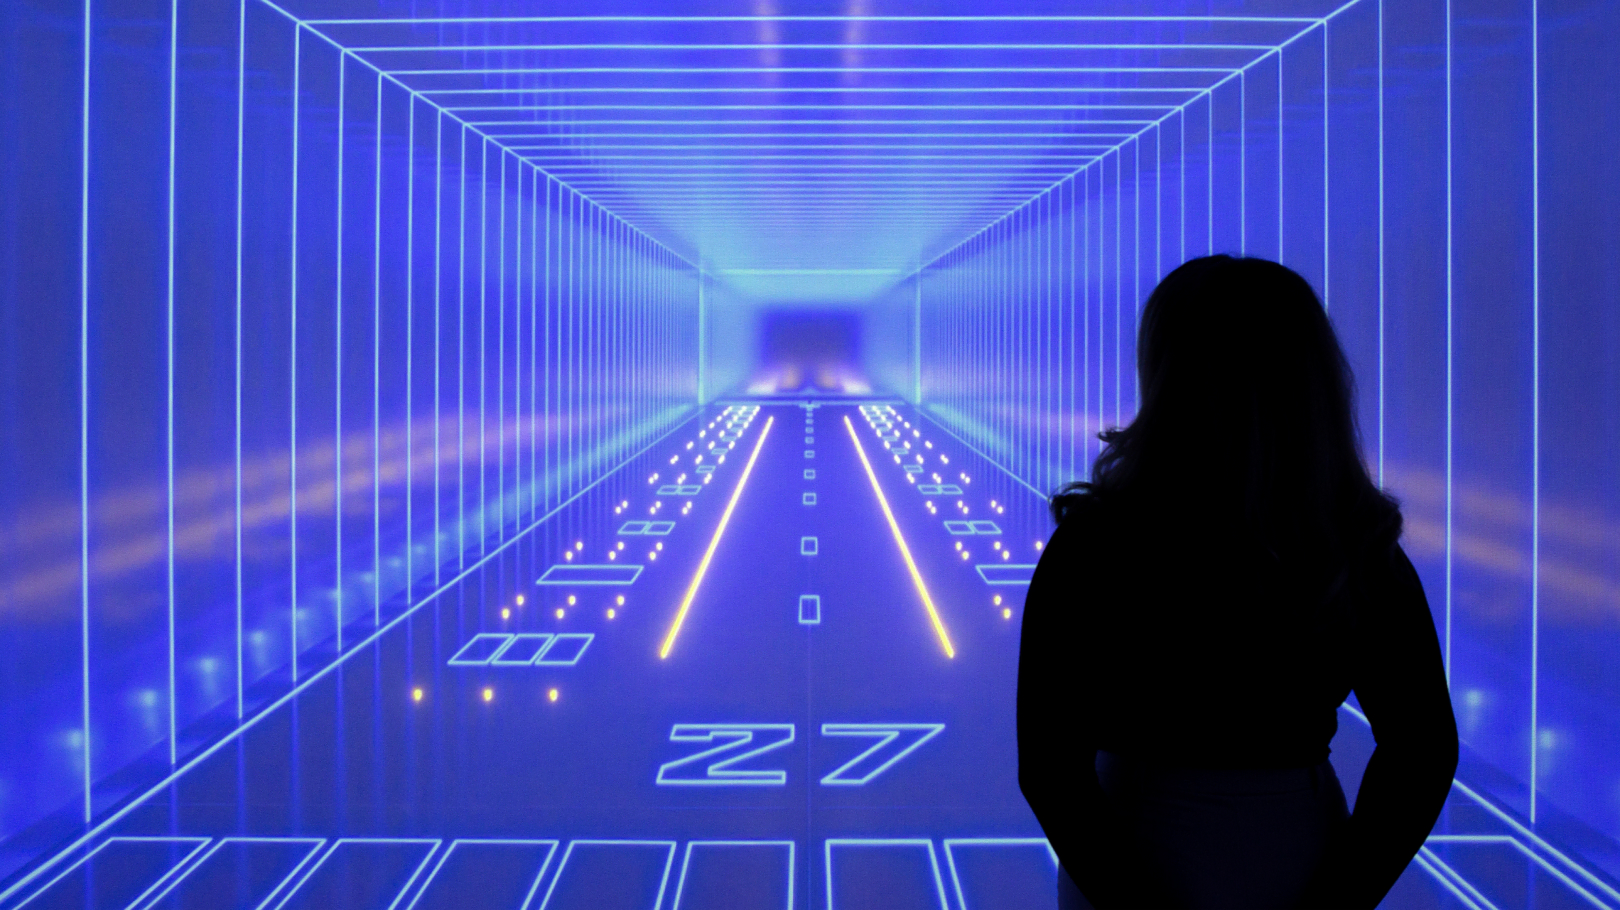 The silhouette of a woman in front of a bright blue image depicting a fantastical neon runway inside an endless tunnel